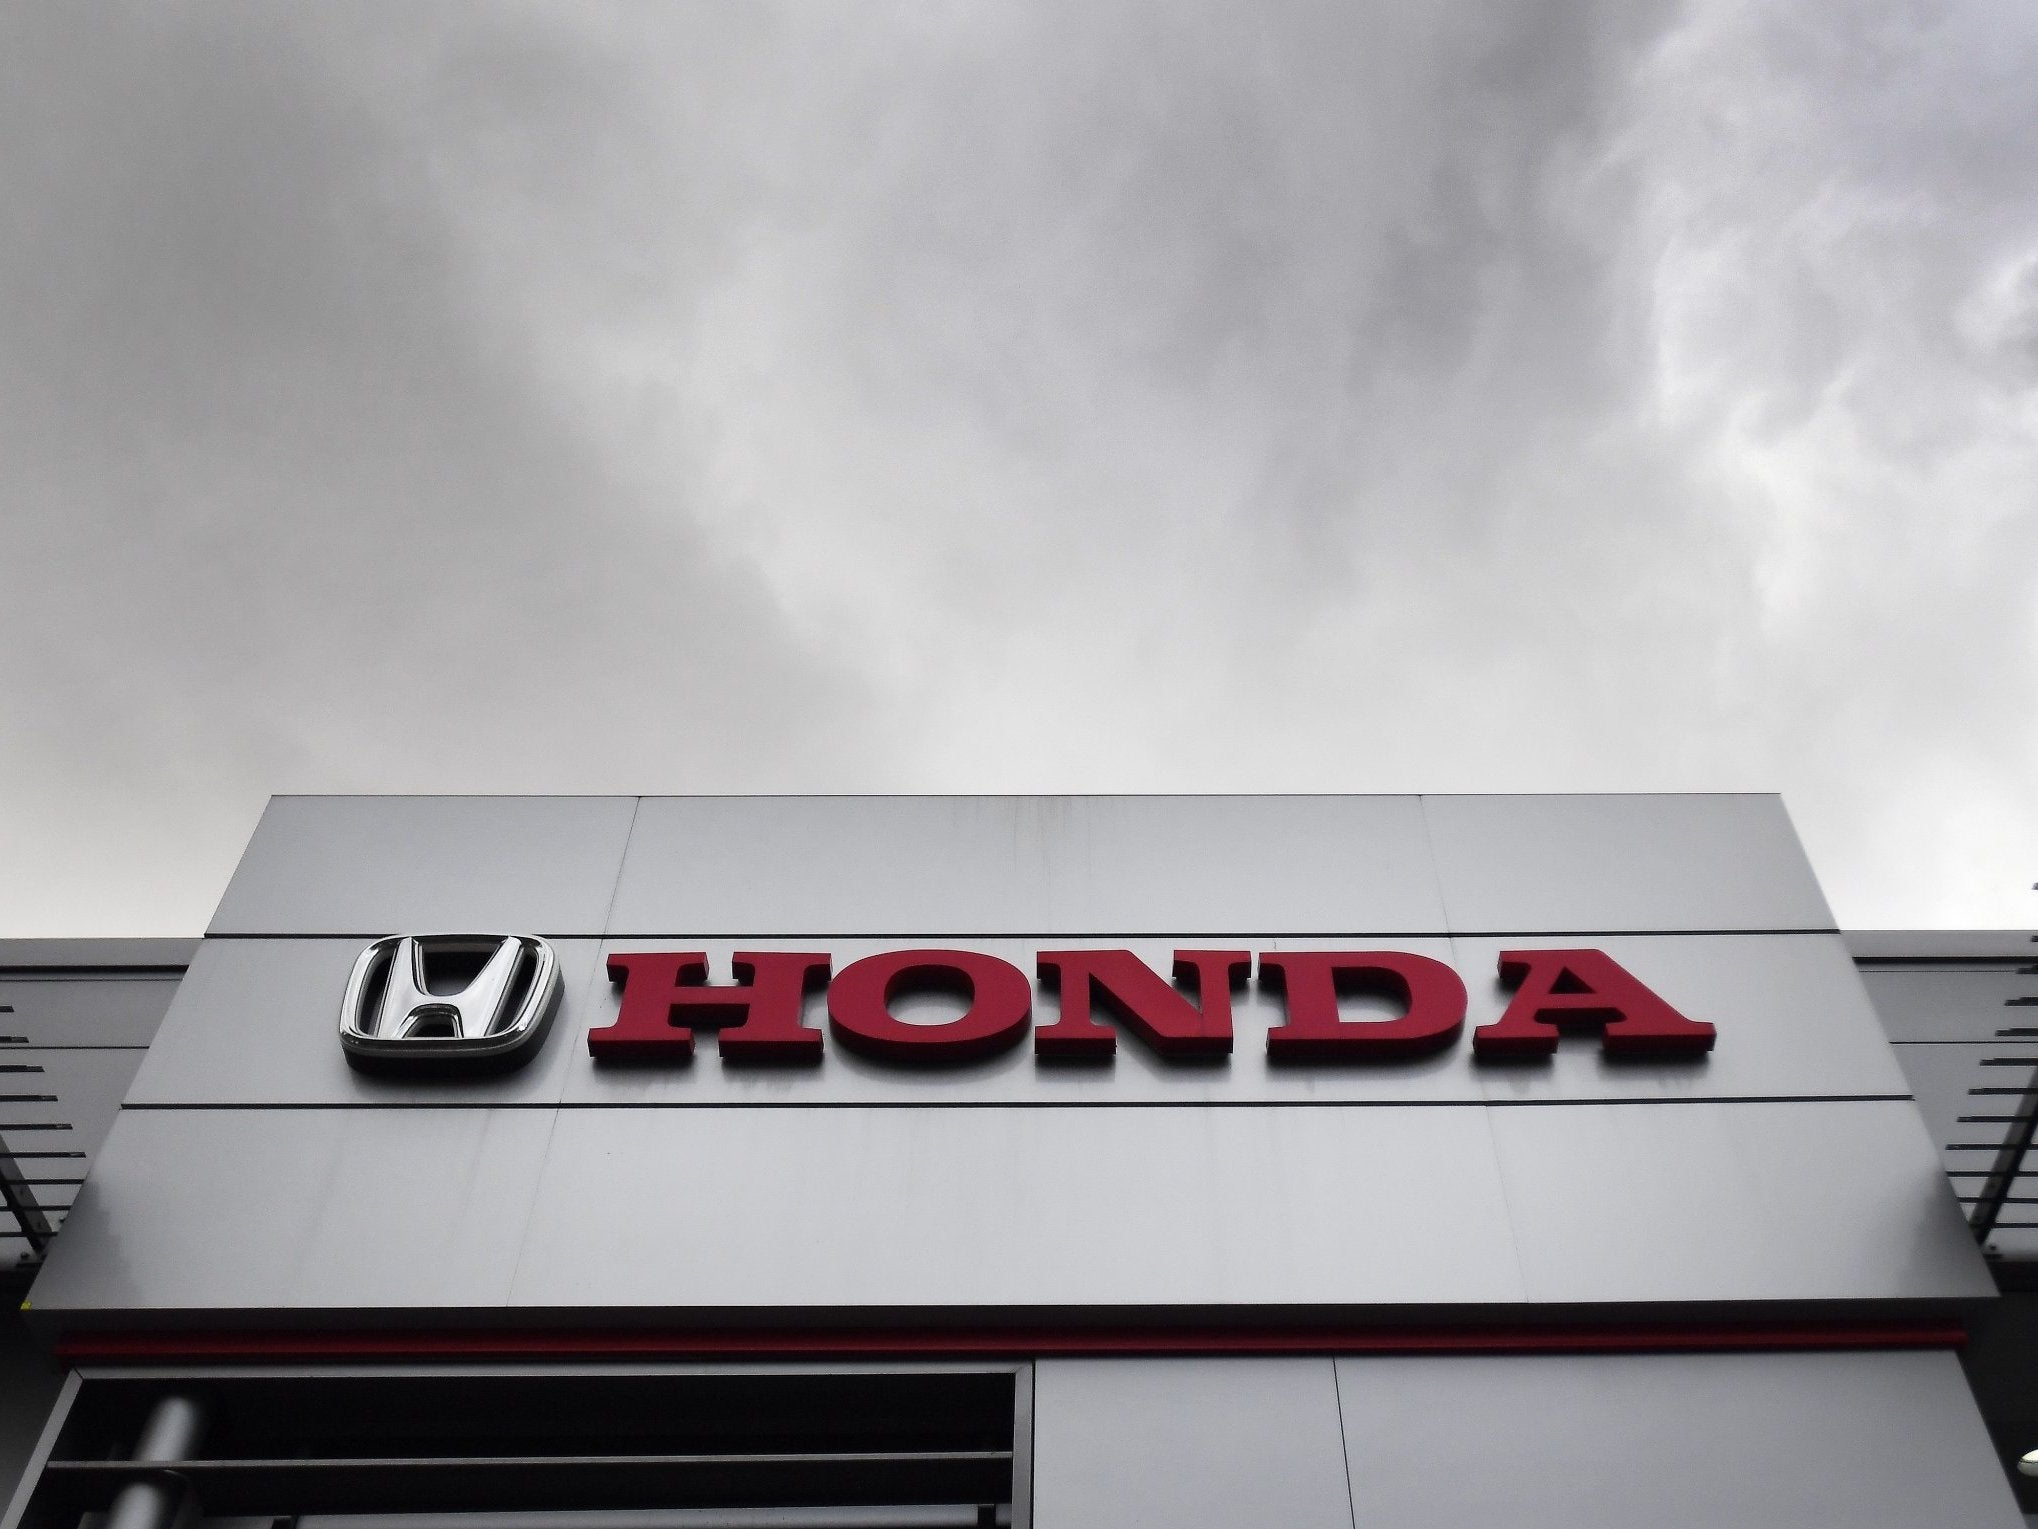 Honda has announced plans to close its Swindon plant, putting thousands of jobs at risk